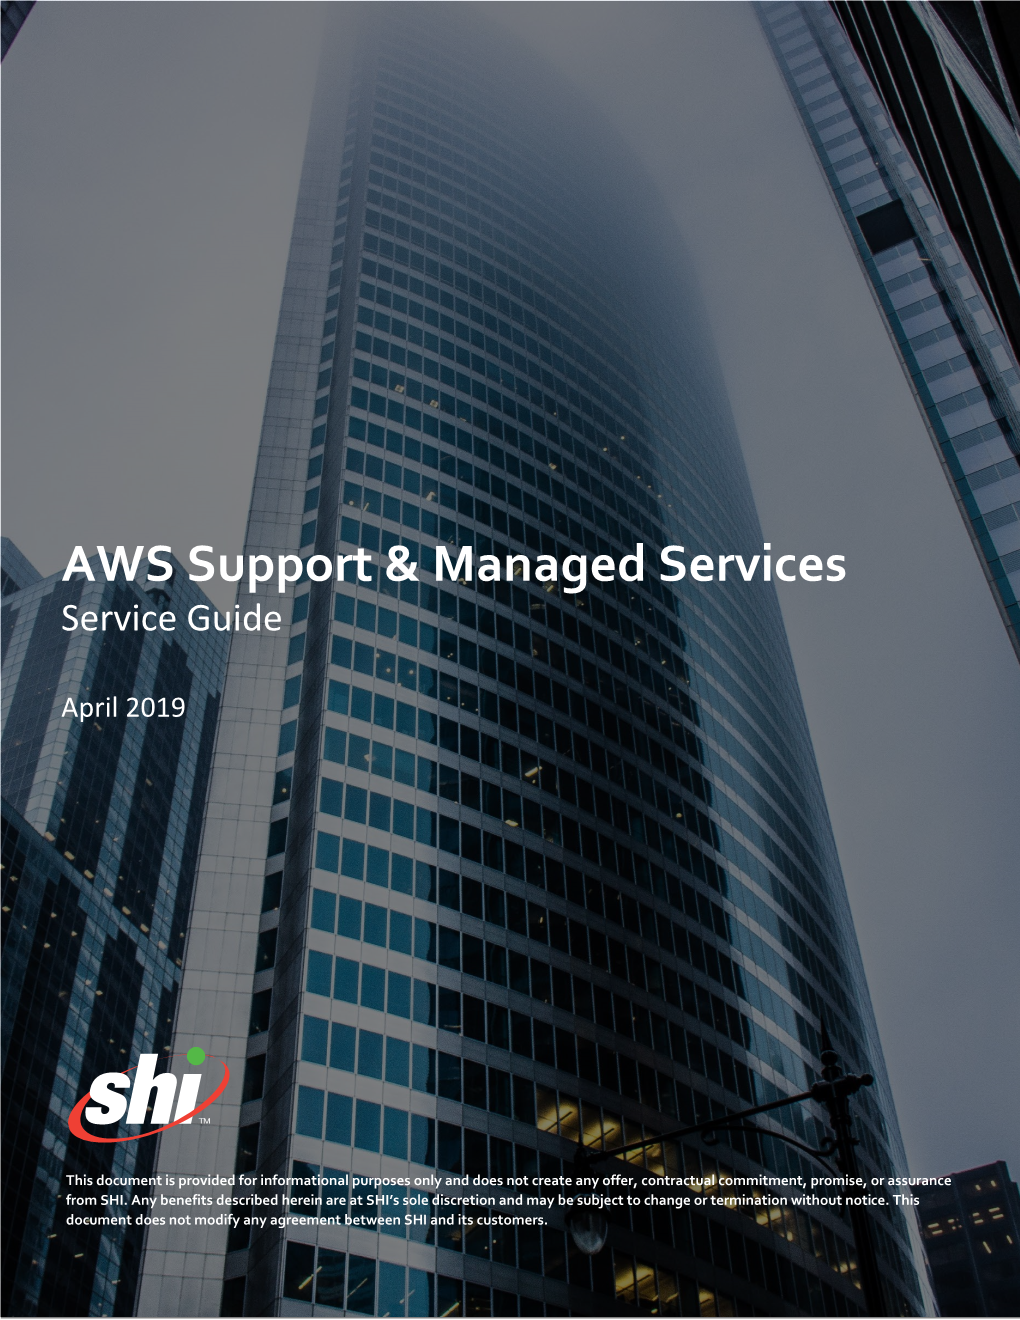 AWS Support & Managed Services